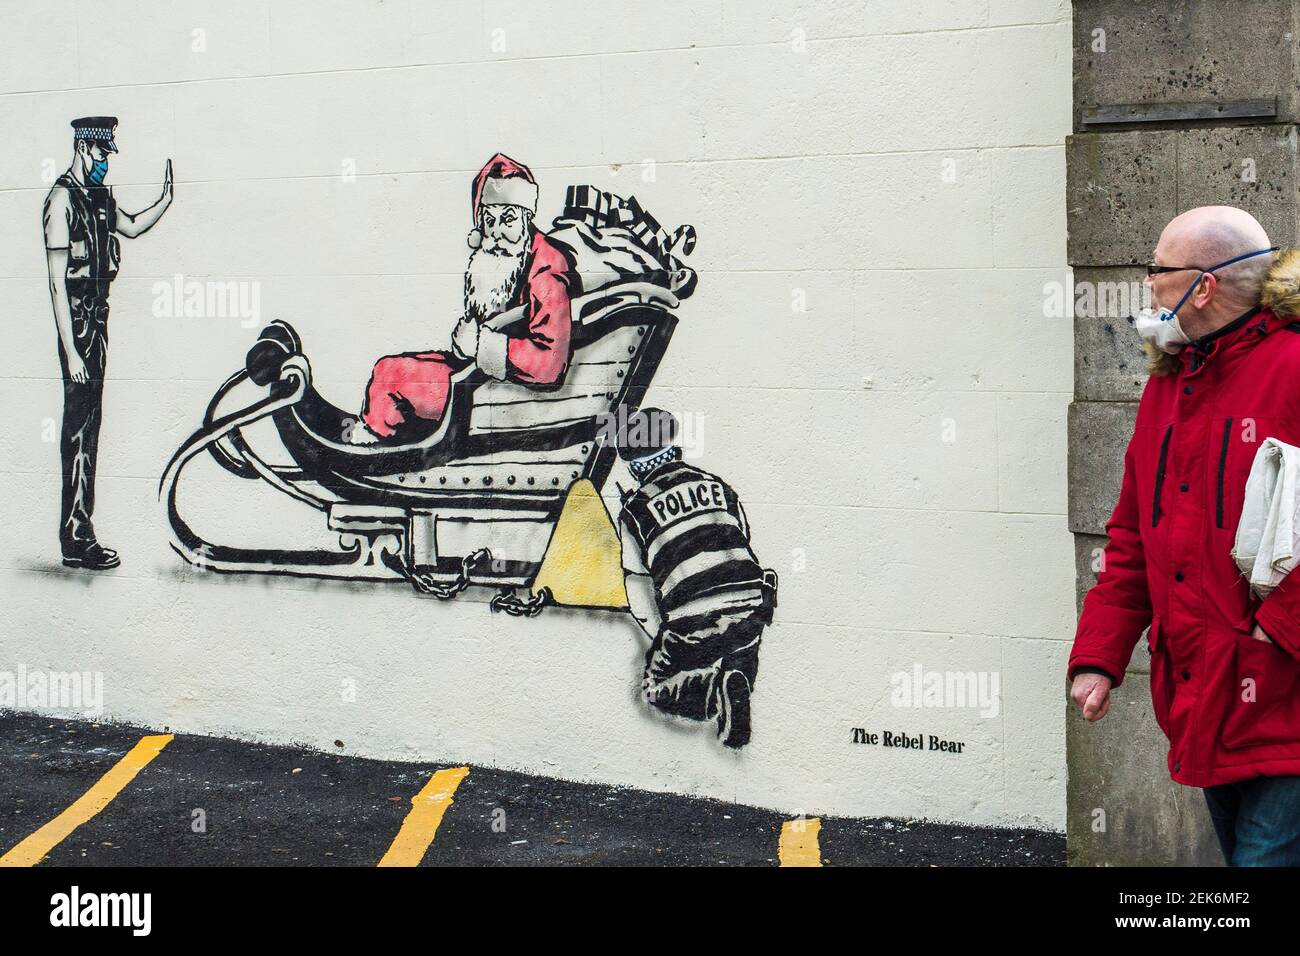 Artist Rebel Bear leaves an art work of Santa being clamped by police officers on a wall on Leith walk.  Credit: Euan Cherry Stock Photo